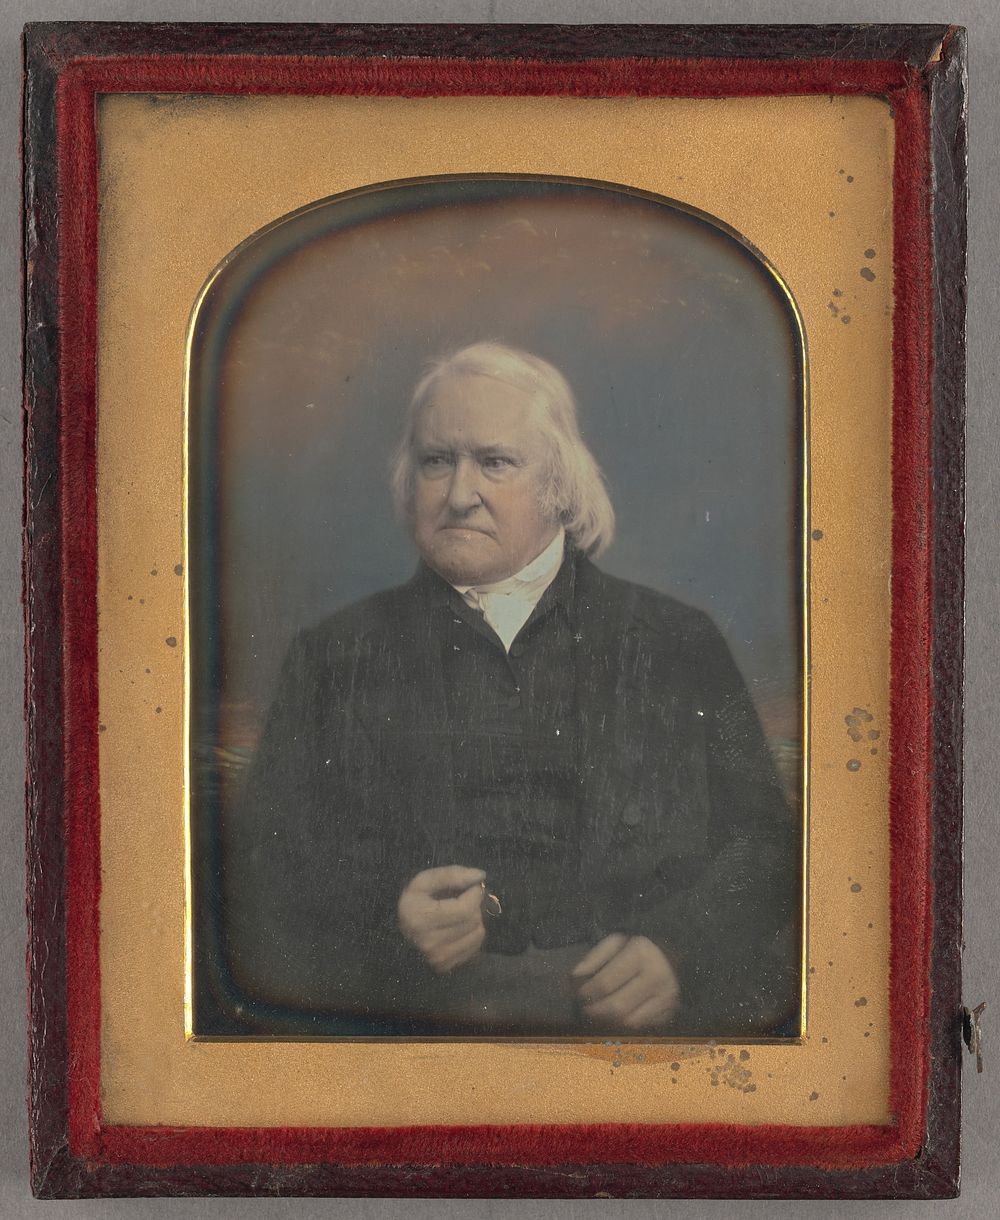 Portrait of an Elderly Man with Long White Hair